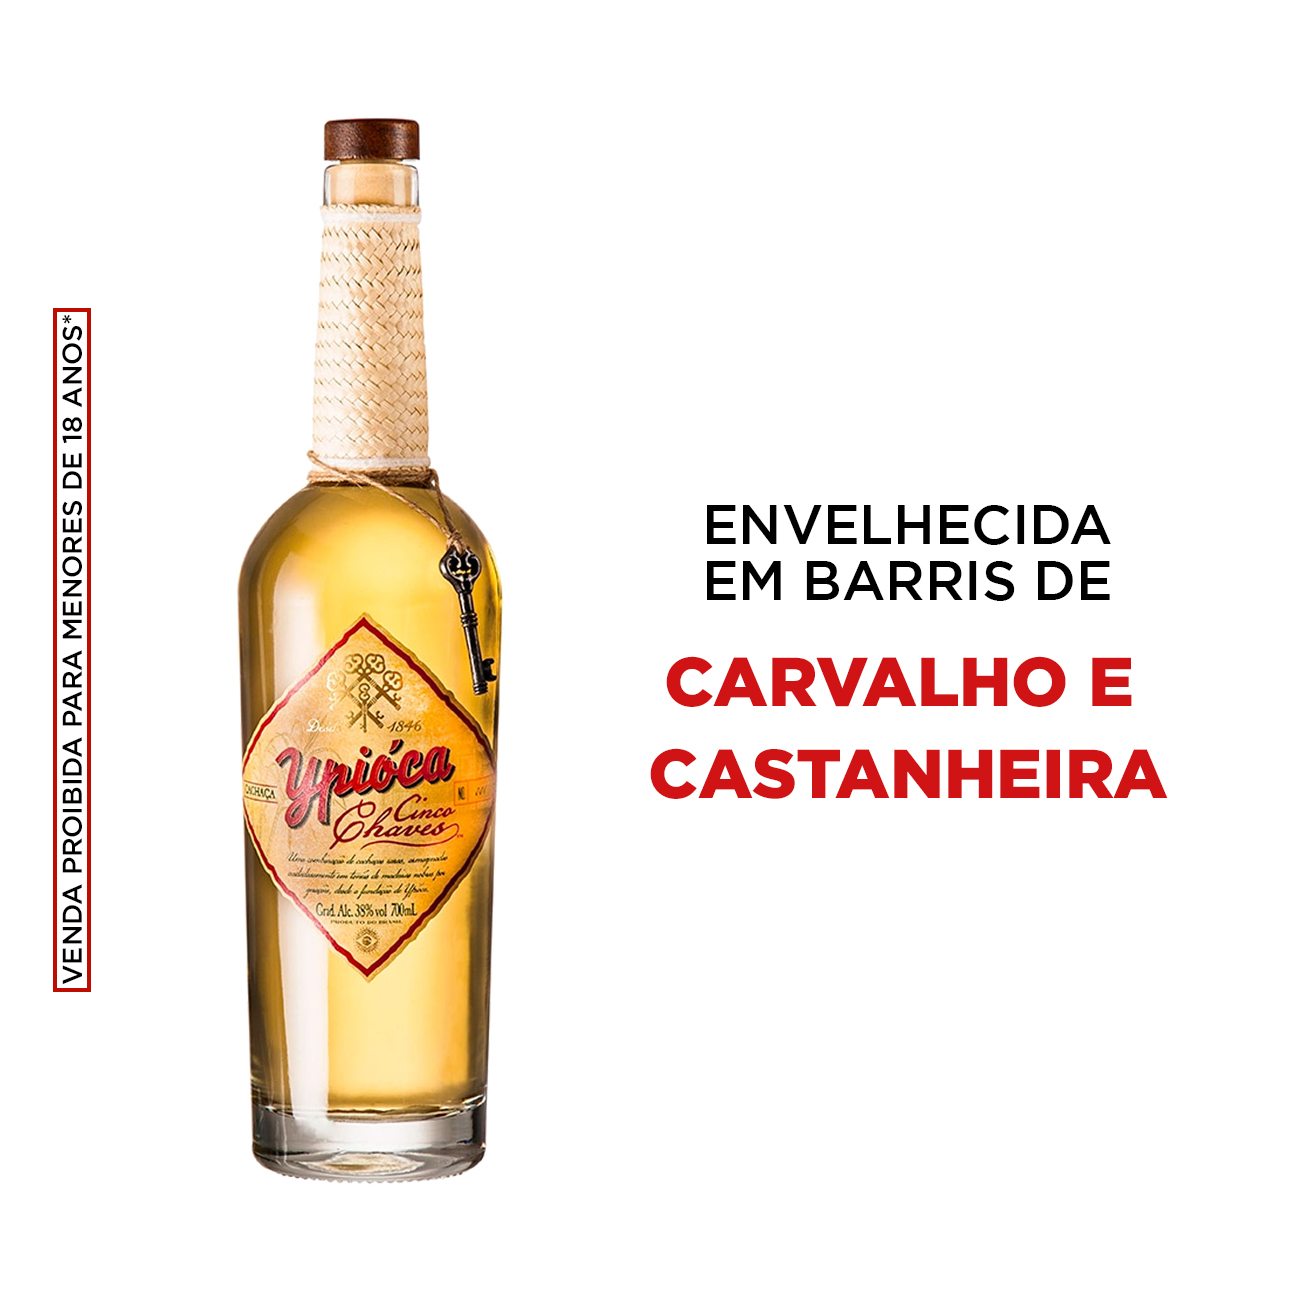 Cachaa Ypica 5 Chaves 700ml